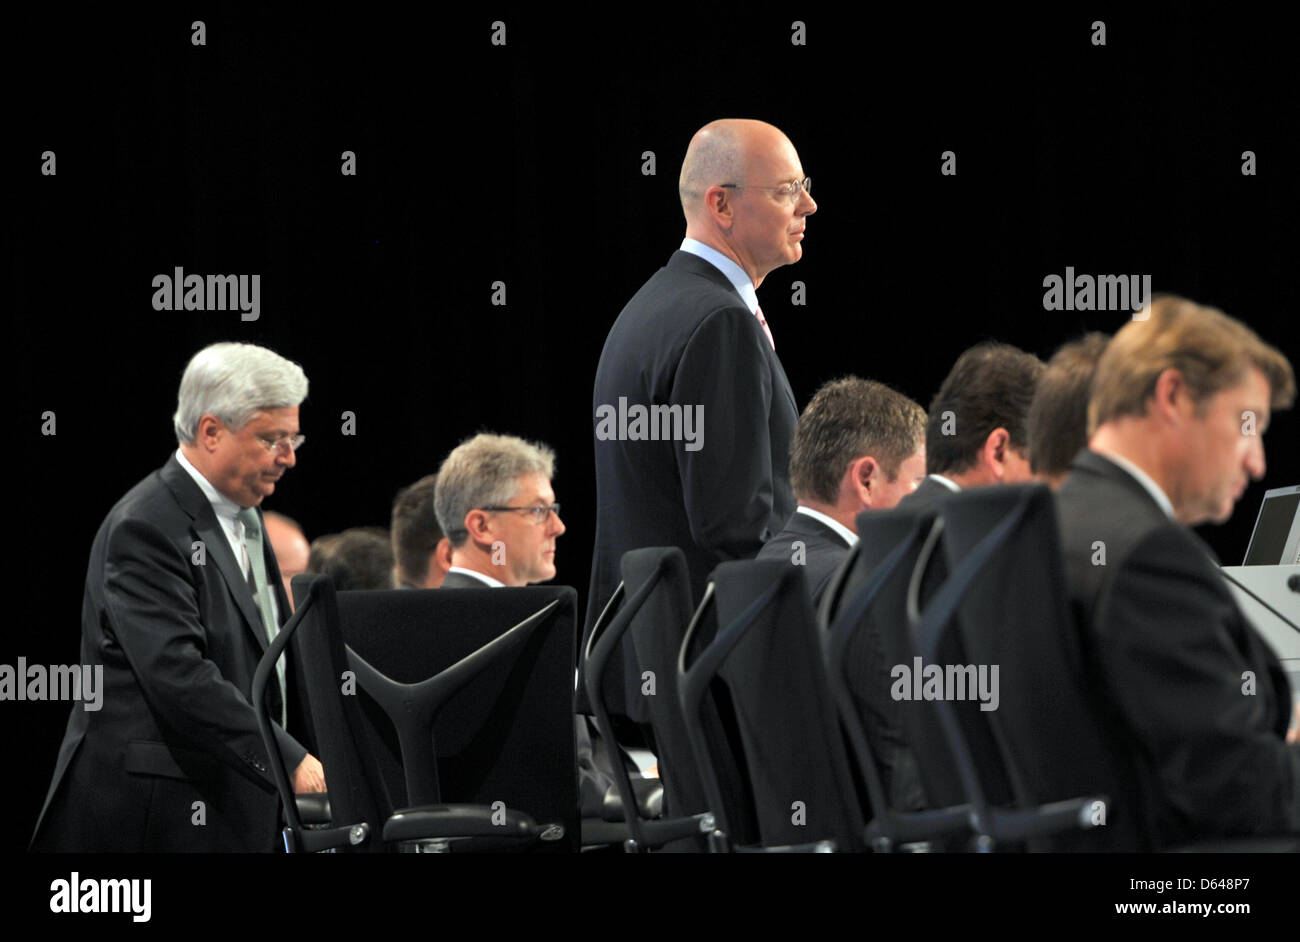 CEO of Commerzbank Ag Martin Blessing (C) speaks at the company's annual general meeting at Centennial Hall in Frankfurt Main, Germany, 23 May 2012. With him on stage are chairman of the board Klaus-Peter Mueller (LK) and other members of the board. Shareholders are not too happy: stock prices have plummeted and there will not be a dividend for the fourth year in a row. On top of t Stock Photo